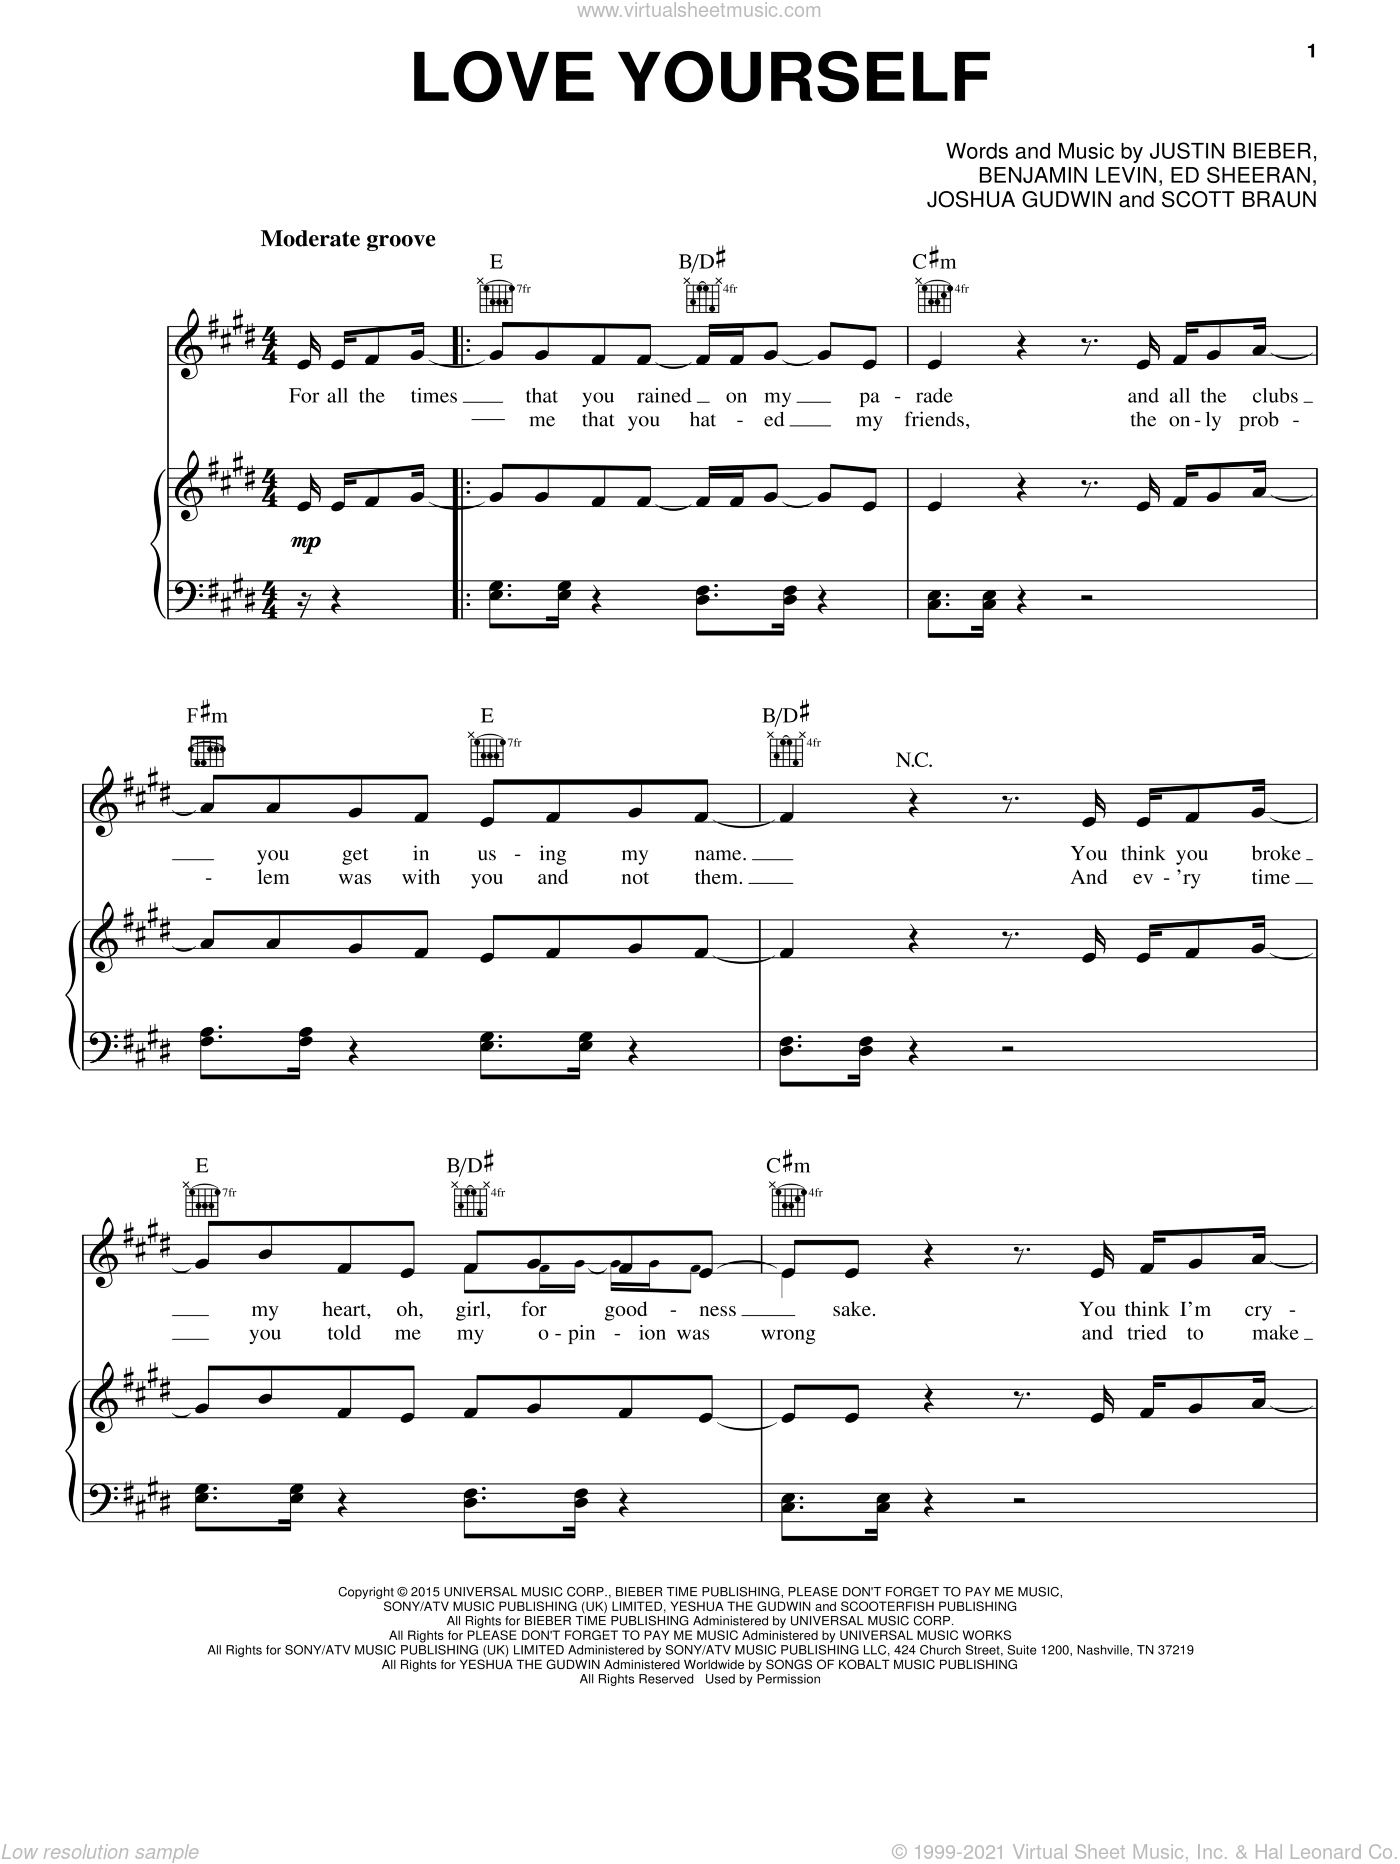 Bieber - Love Yourself sheet music for voice, piano or guitar